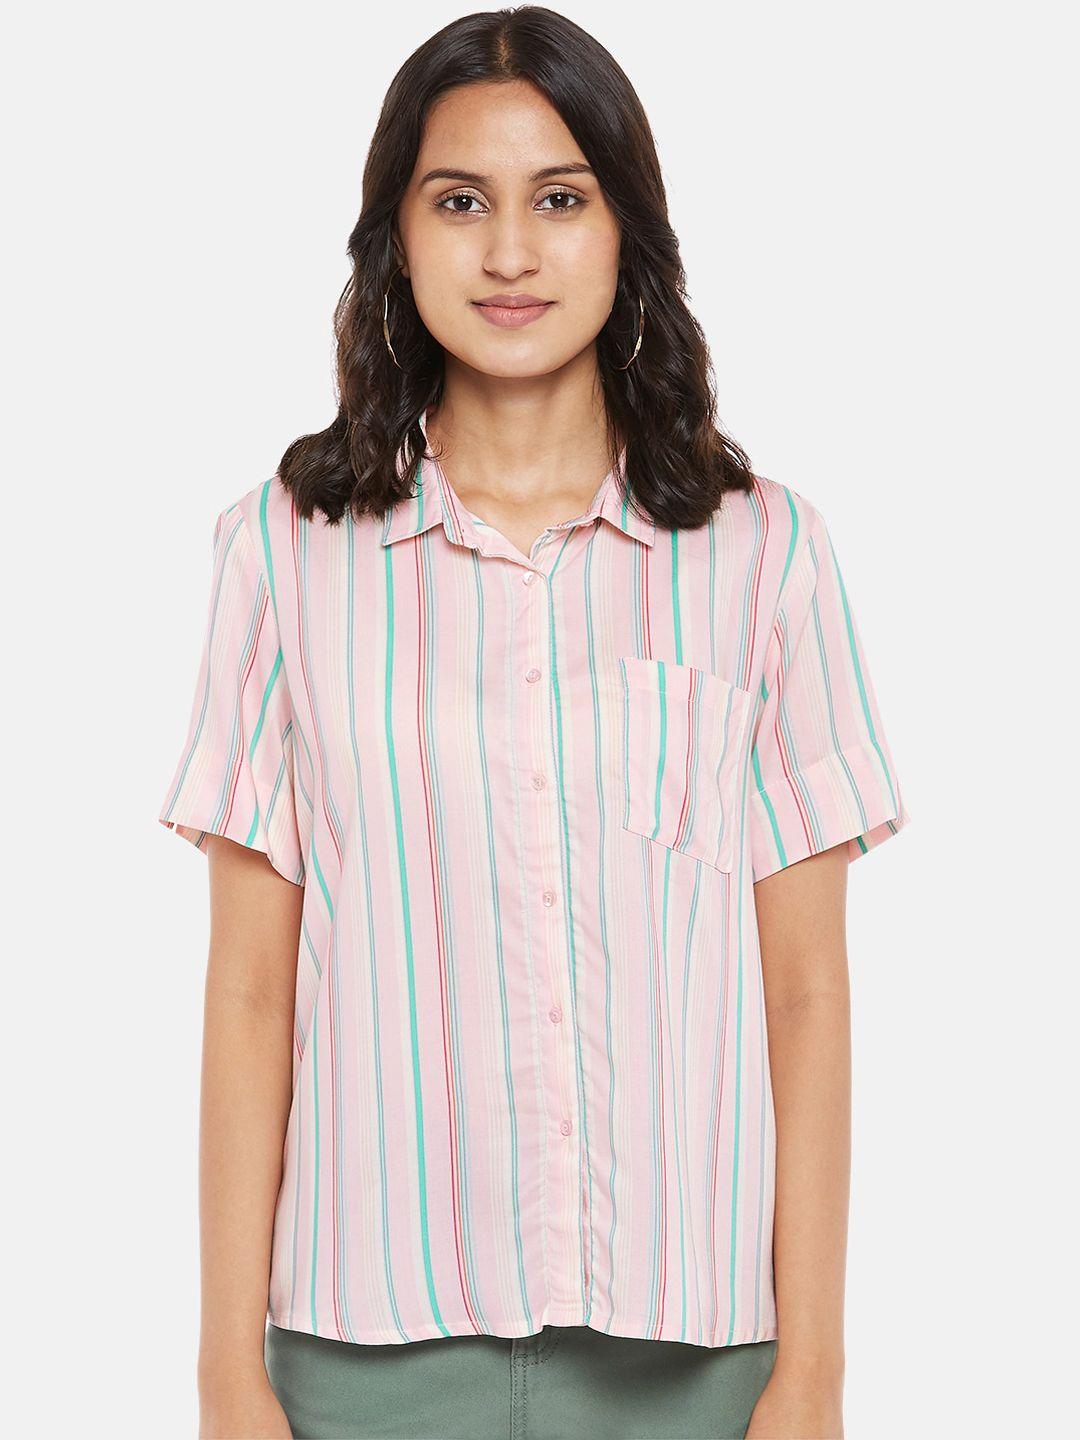 honey-by-pantaloons-women-pink-opaque-striped-casual-shirt